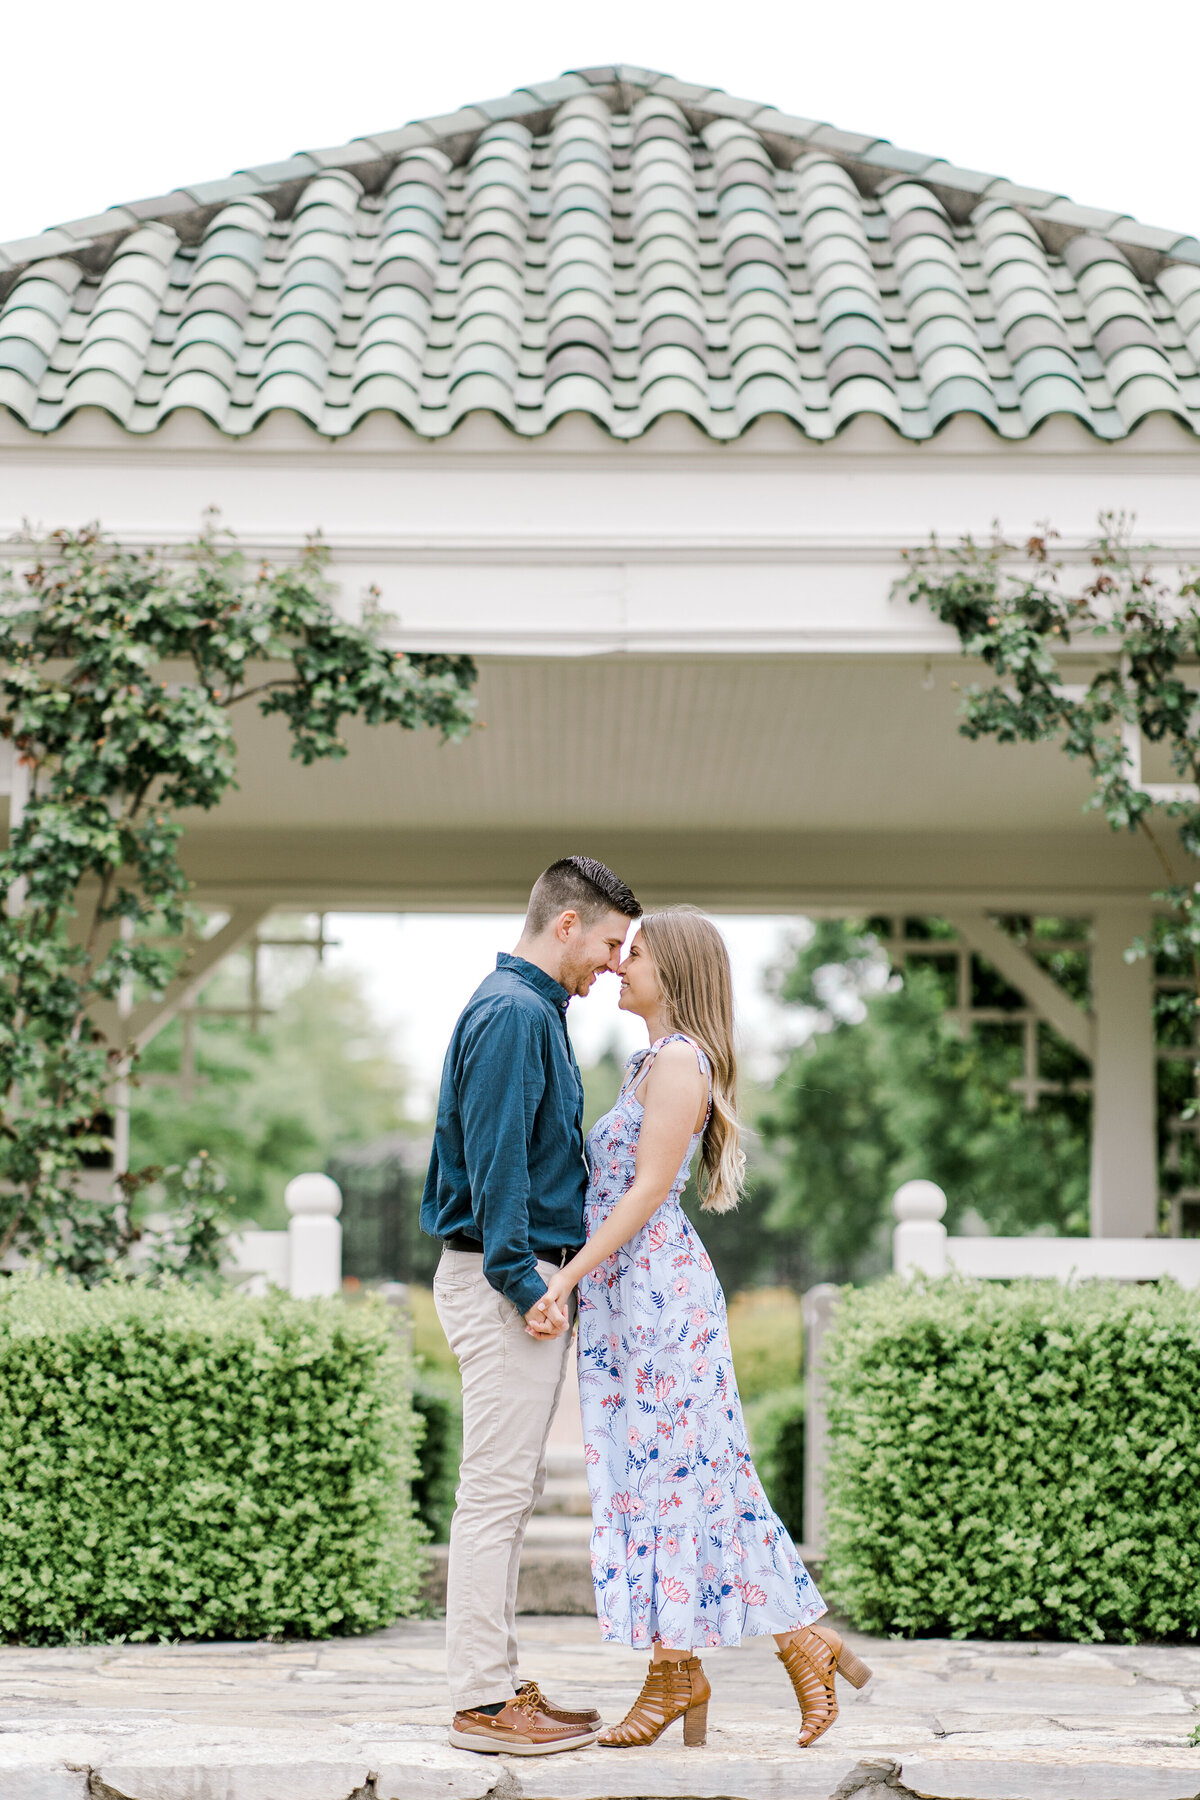 Hershey Garden Engagement Session Photography Photo-35